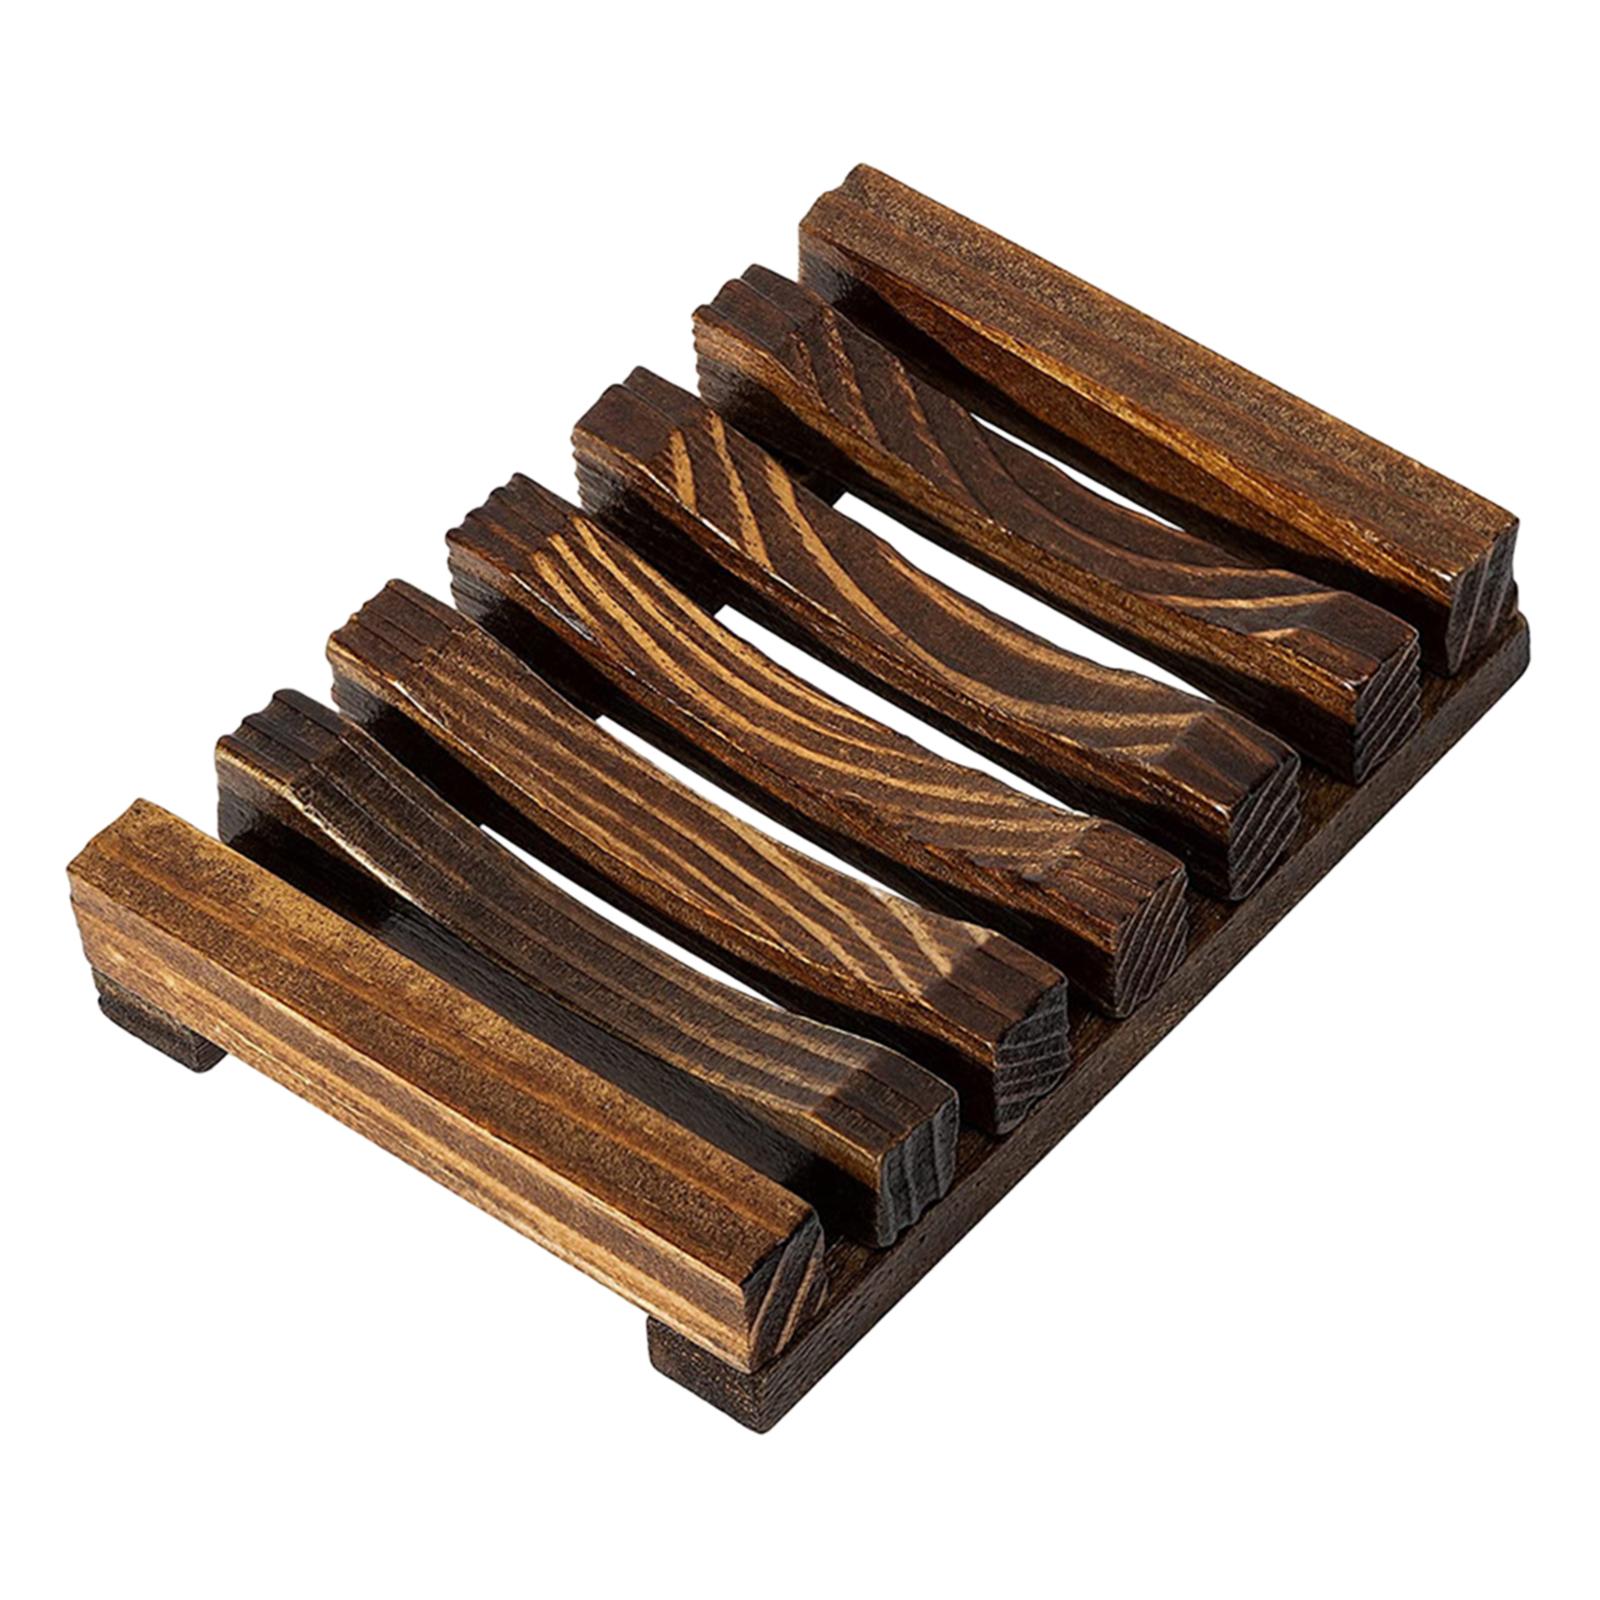 Wooden Soap Dish Home Decor Self Draining Soap Dish for Shower Sink Bathroom Dark Wood Color